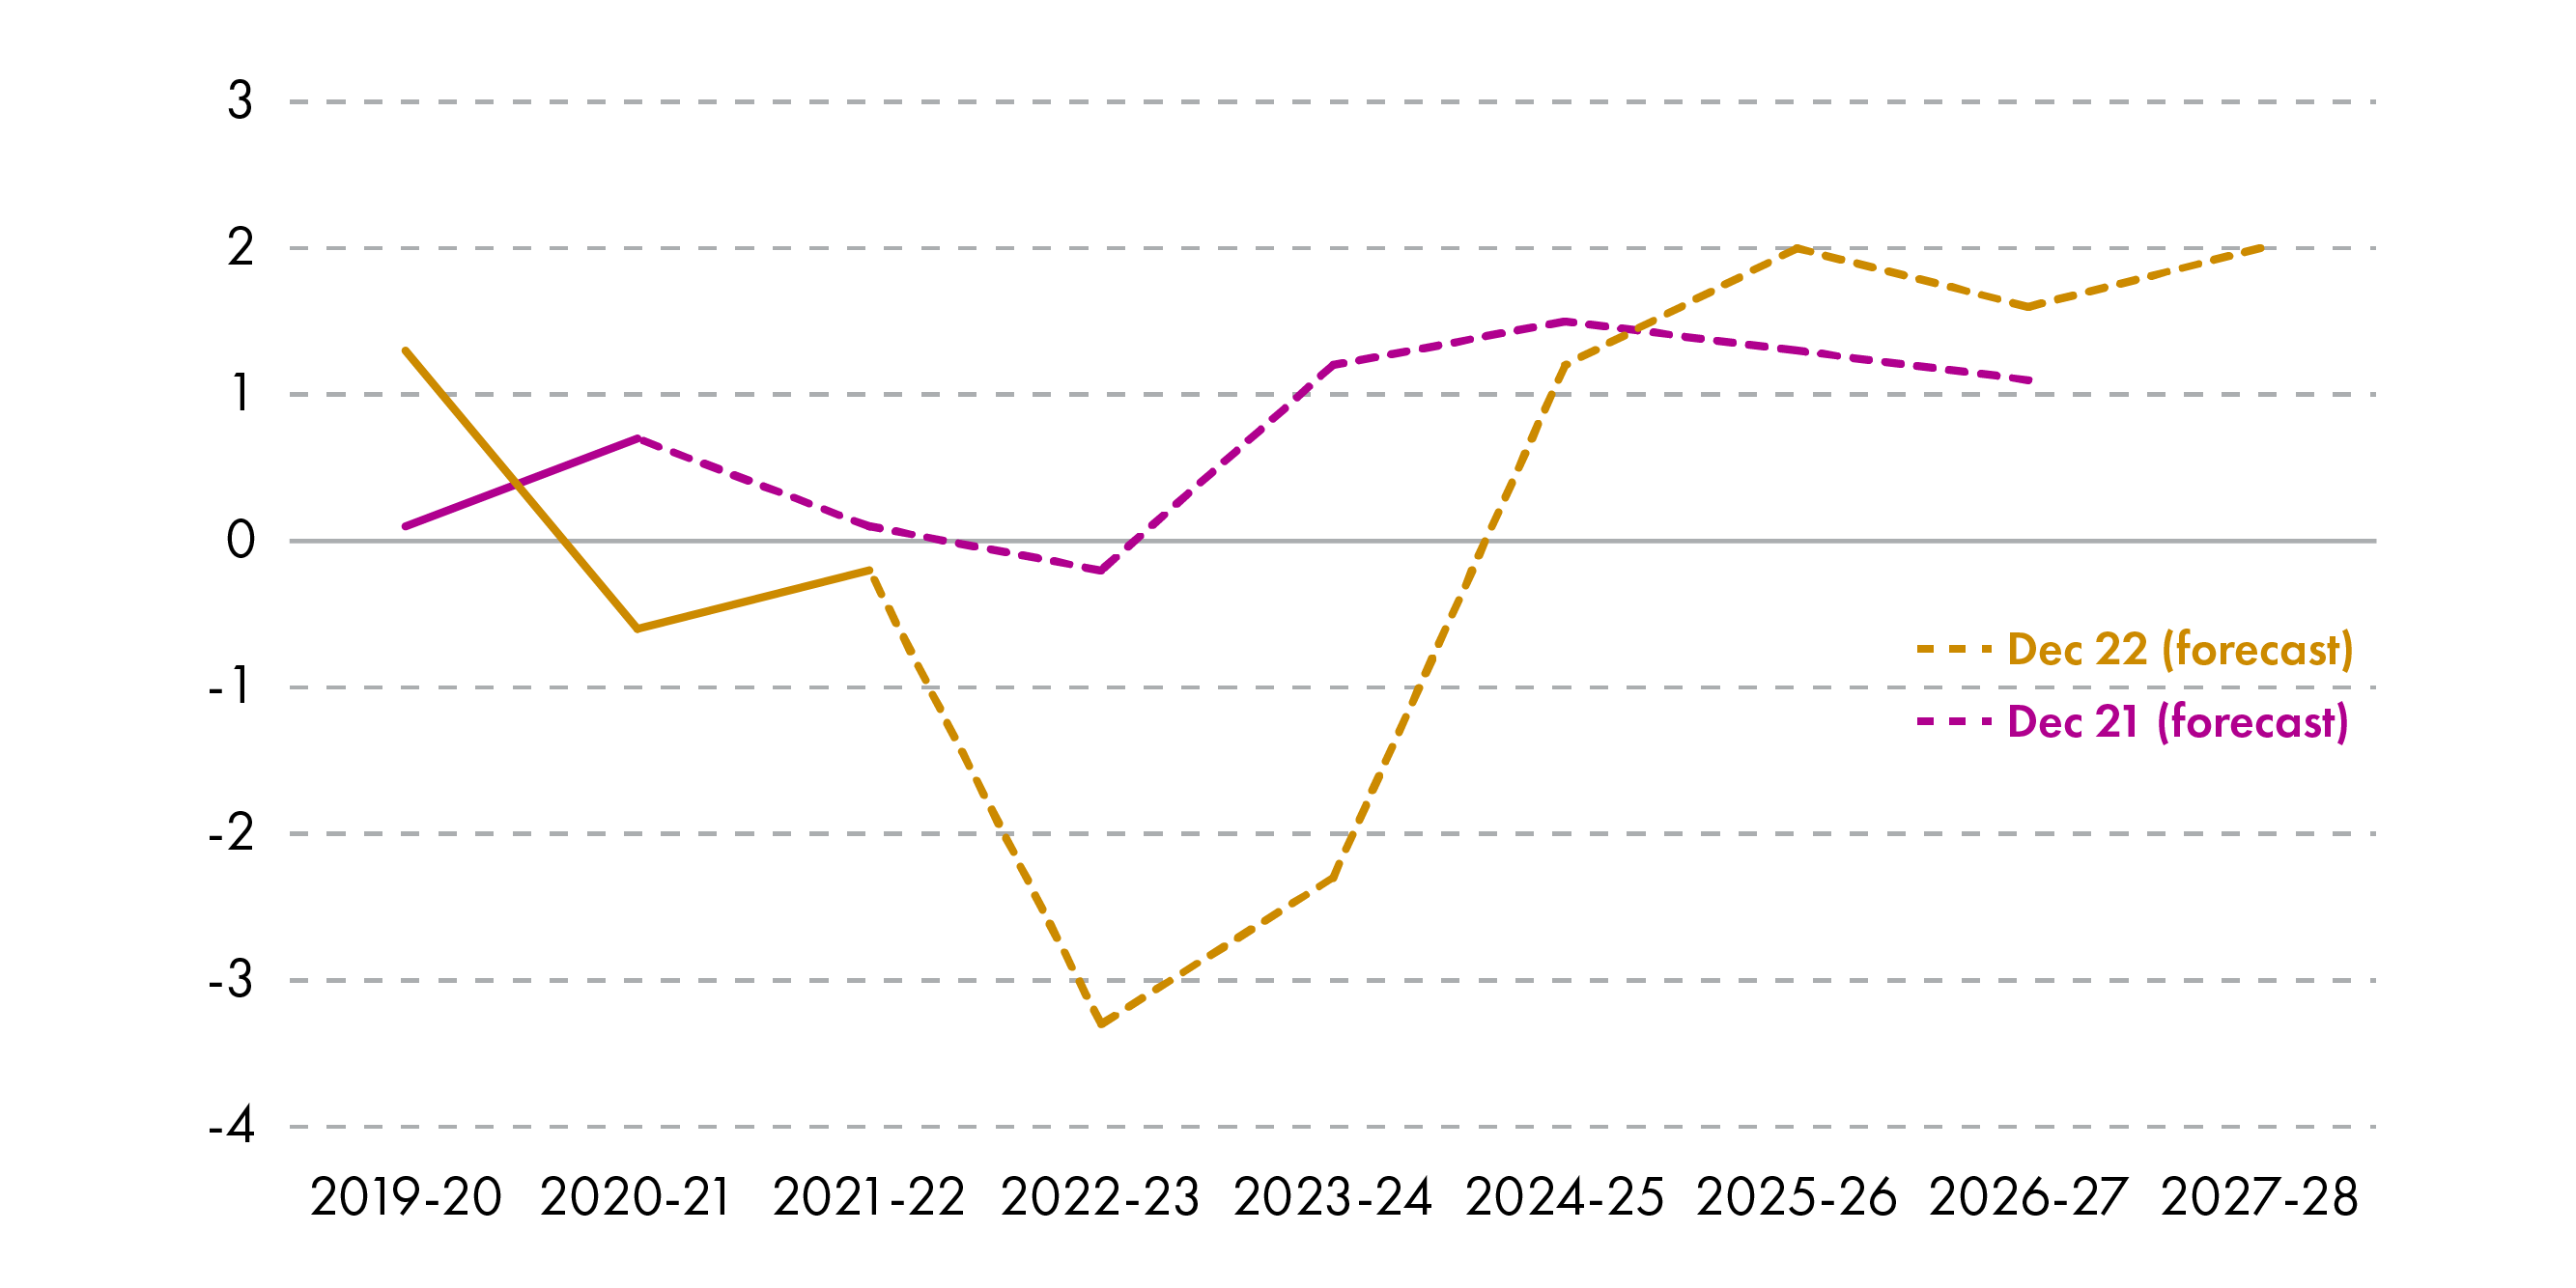 A line graph with an orange line showing the real disposable income per person growth forecast for December 2022 and a purple line showing the real disposable income per person growth forecast for December 2021.